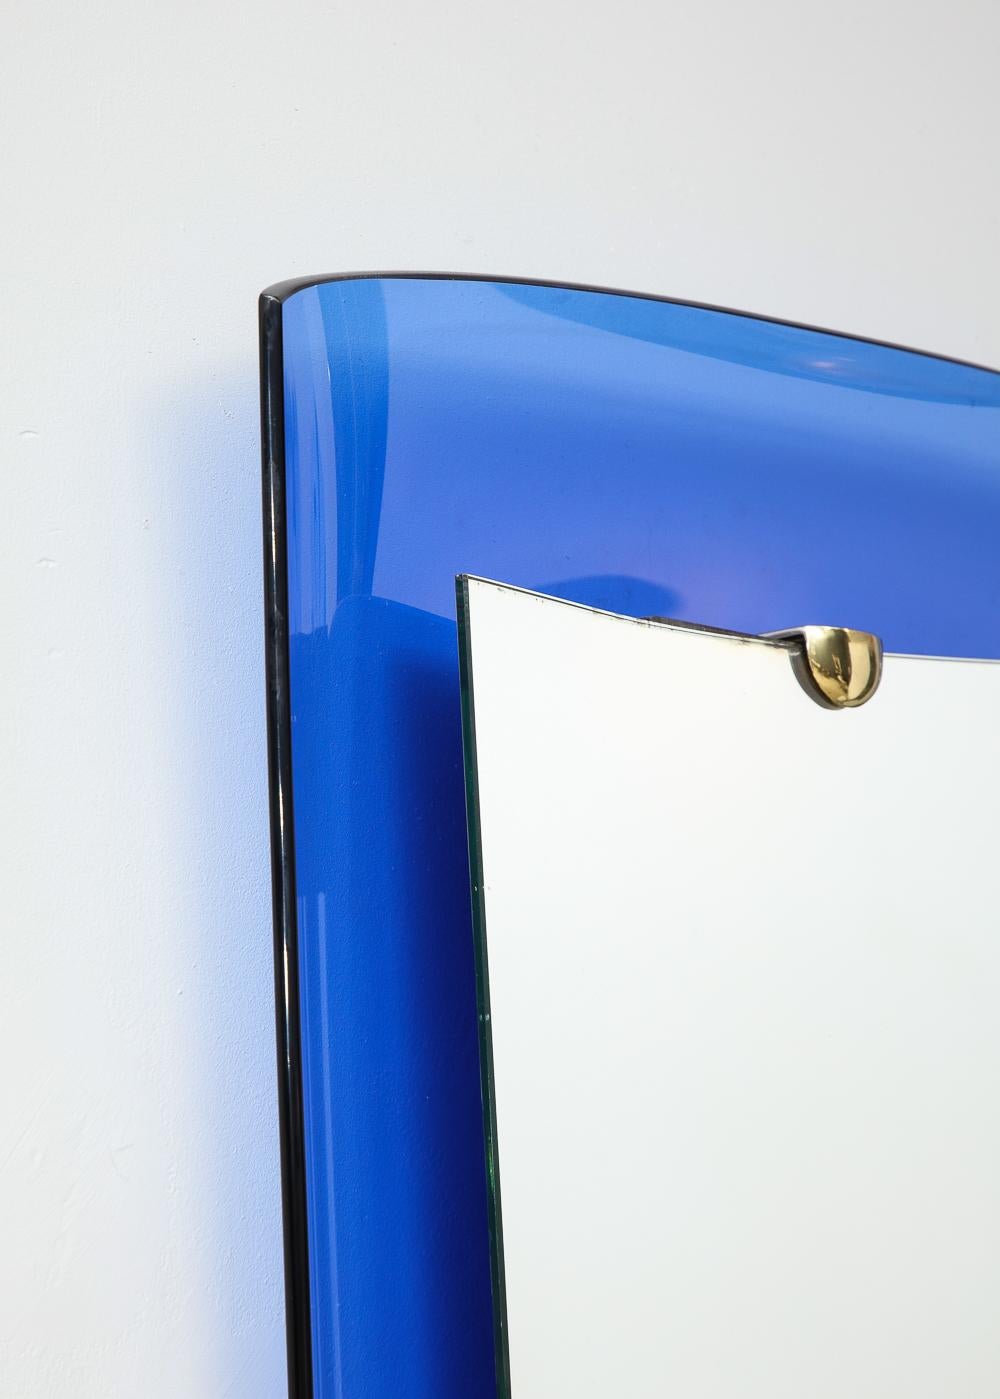 Glass, mirror, brass. Model #2712 by Cristal Art, features a concave blue glass frame with a raised mirrored center held by brass hardware.